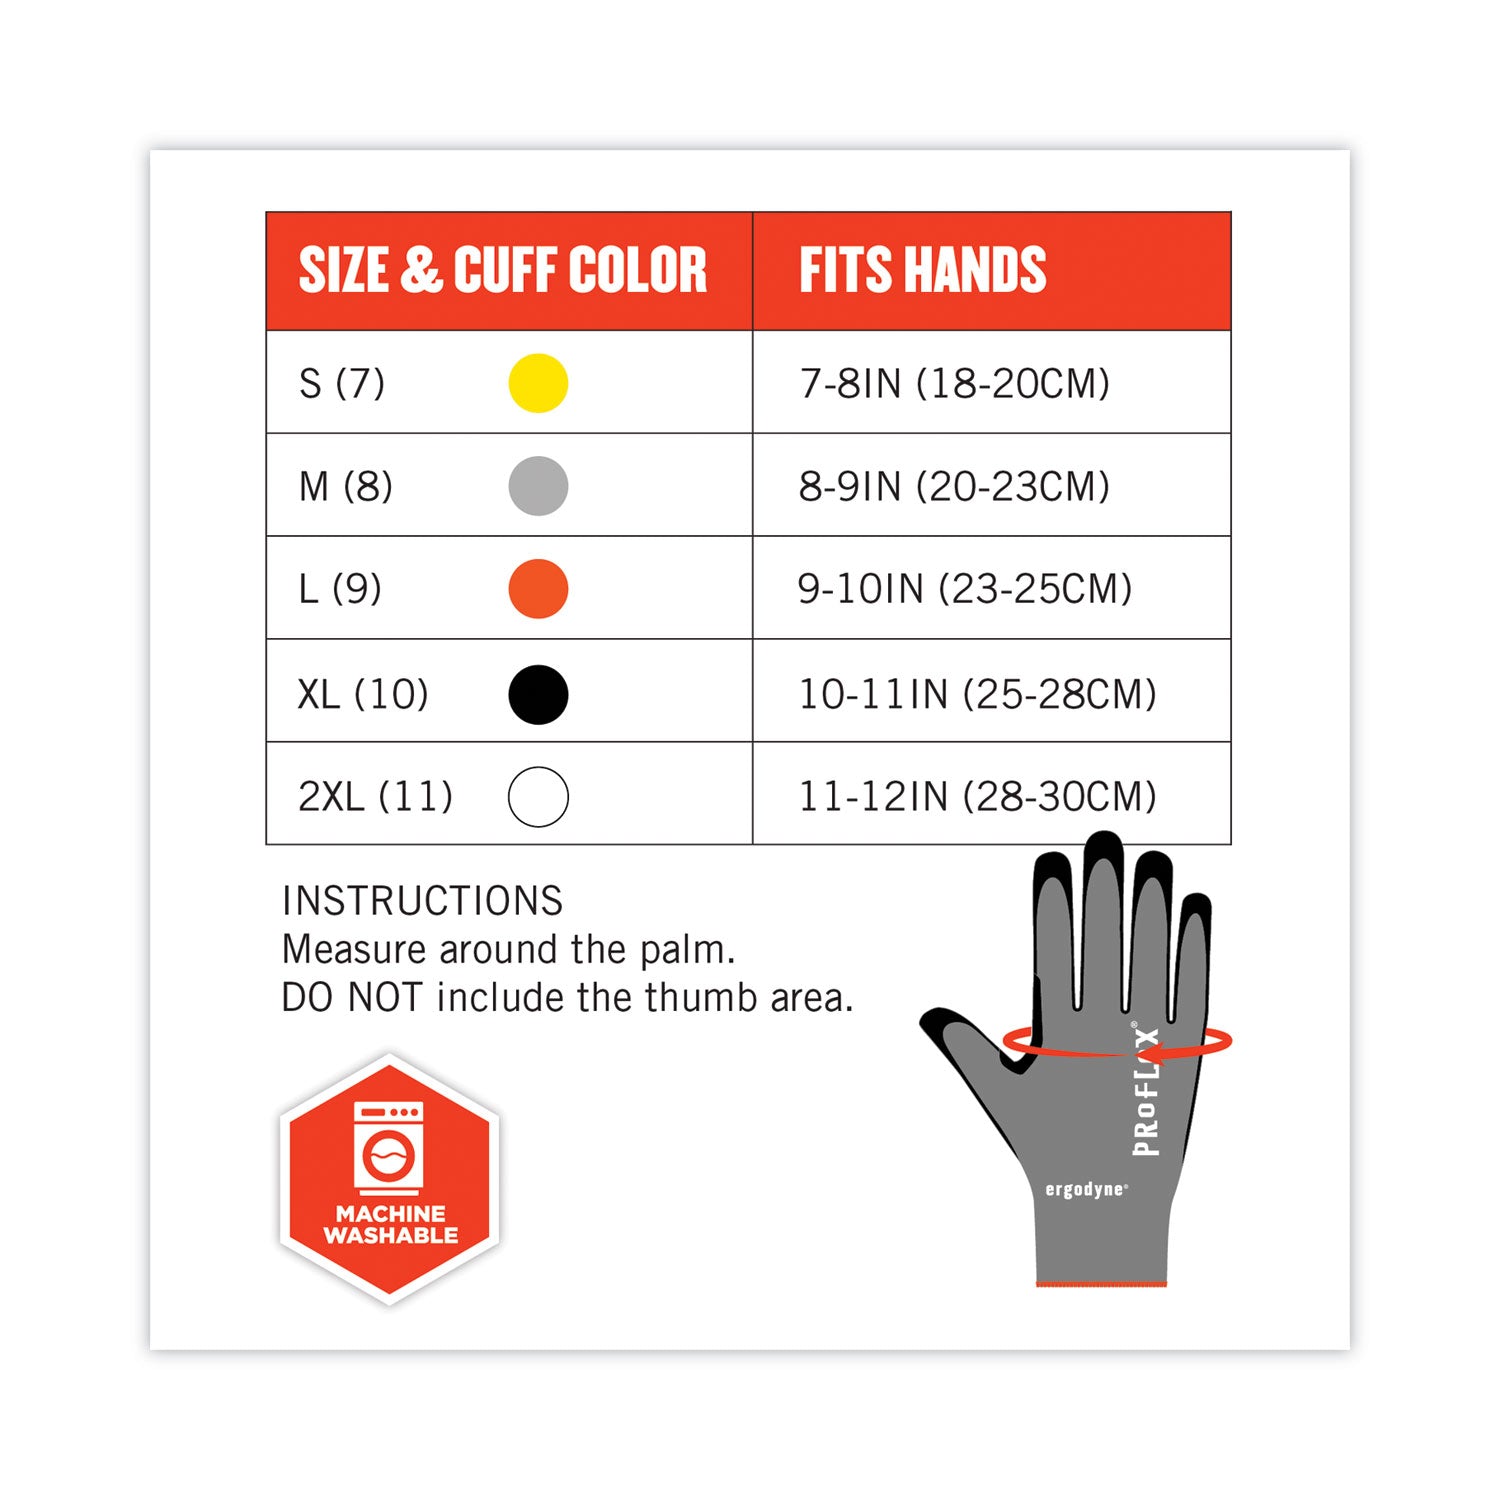 proflex-7072-ansi-a7-nitrile-coated-cr-gloves-gray-x-large-12-pairs-pack-ships-in-1-3-business-days_ego10305 - 3